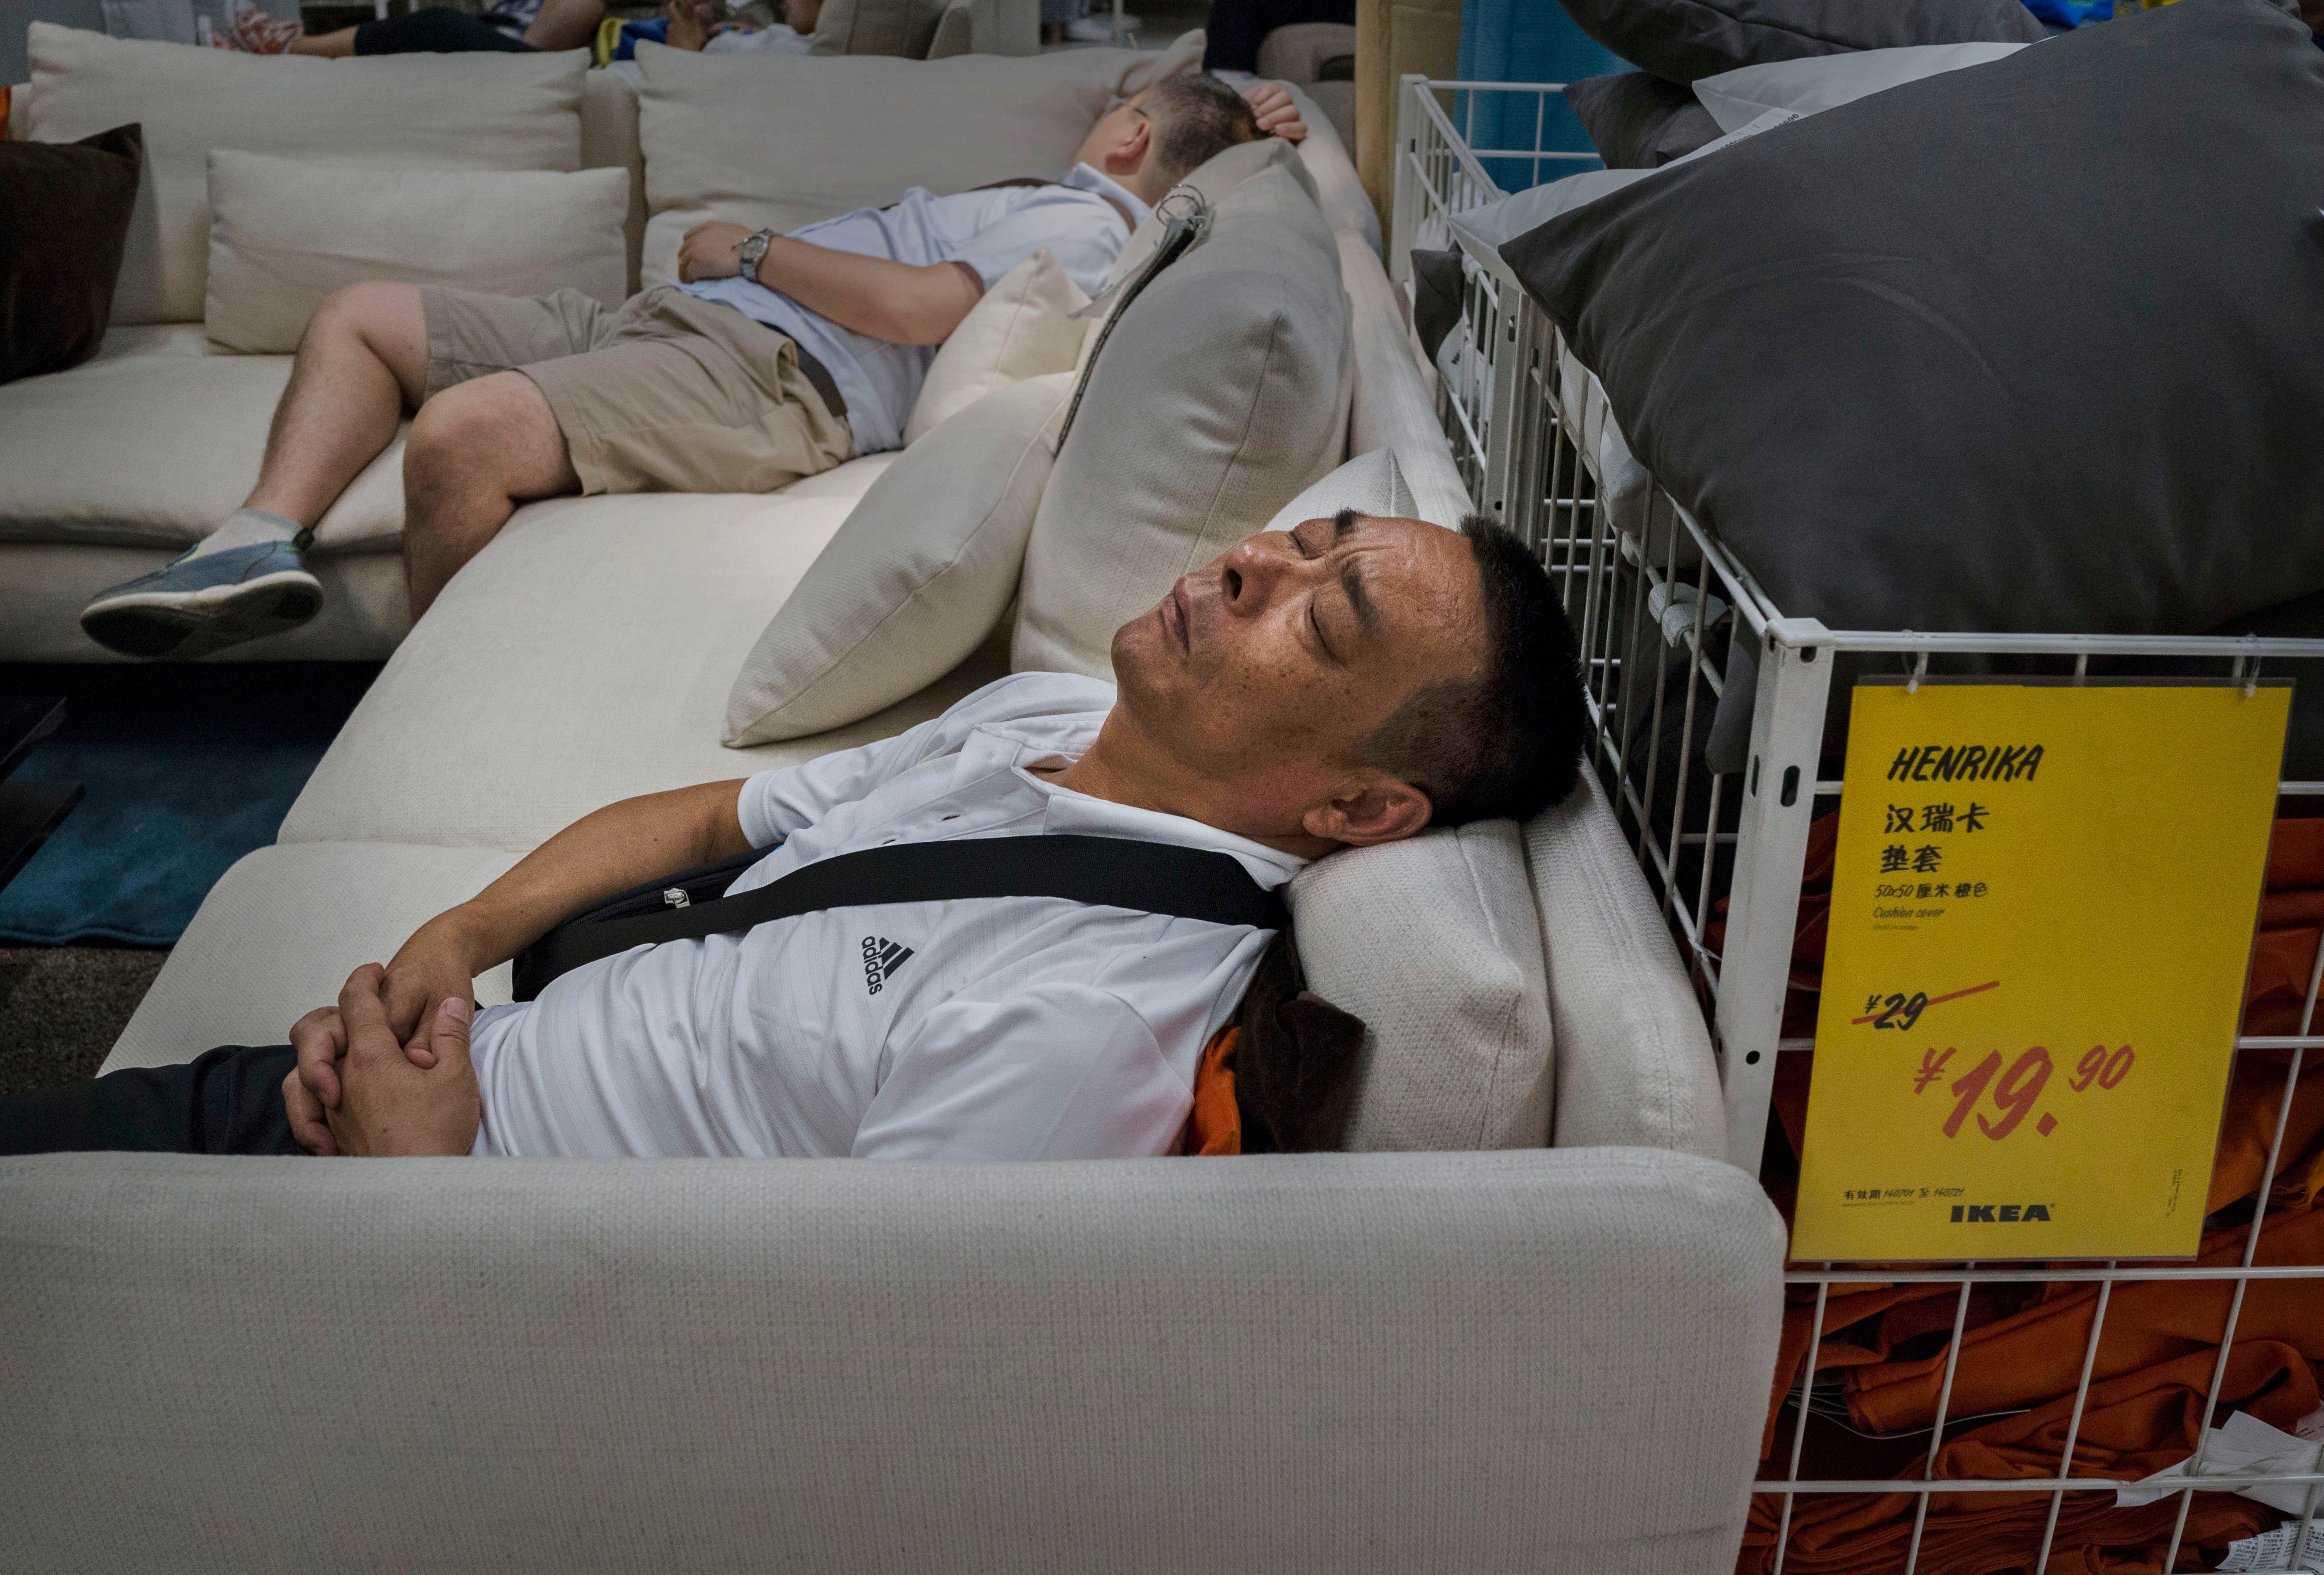 Chinese shoppers sleep on a sofa in the showroom of the IKEA store on July 6, 2014 in Beijing, China. (Kevin Frayer—Getty Images)